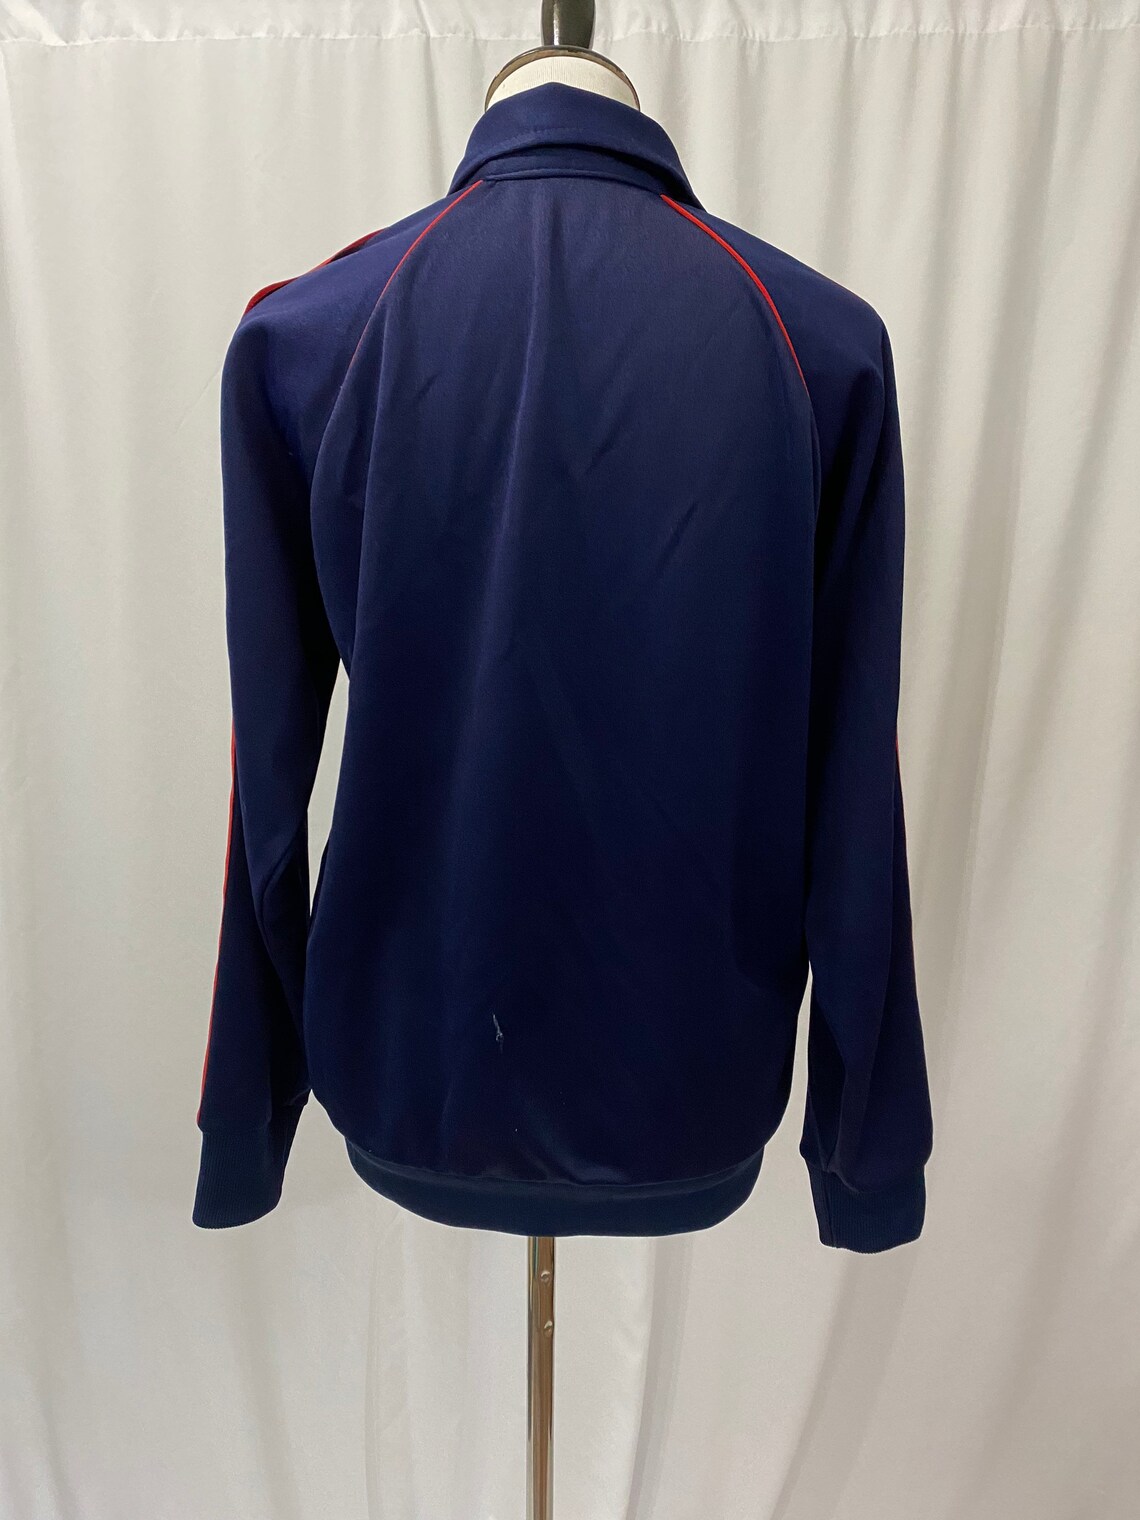 1980s Red and Blue Three Stripe Polyester Track Warmup Jacket - Etsy